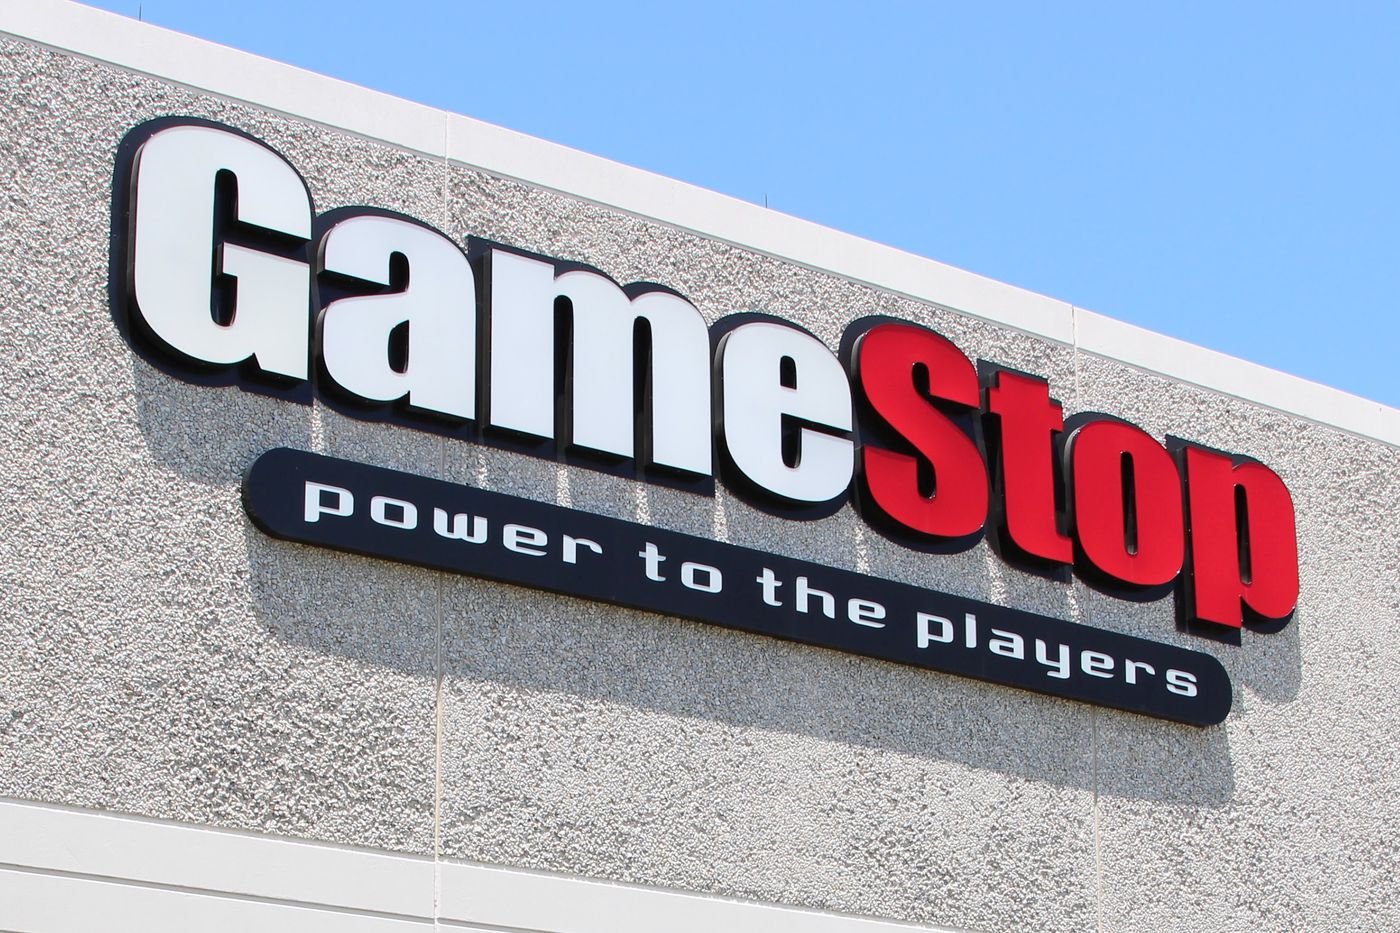 GameStop (GME) stock halted twice as shares jump over 100% today